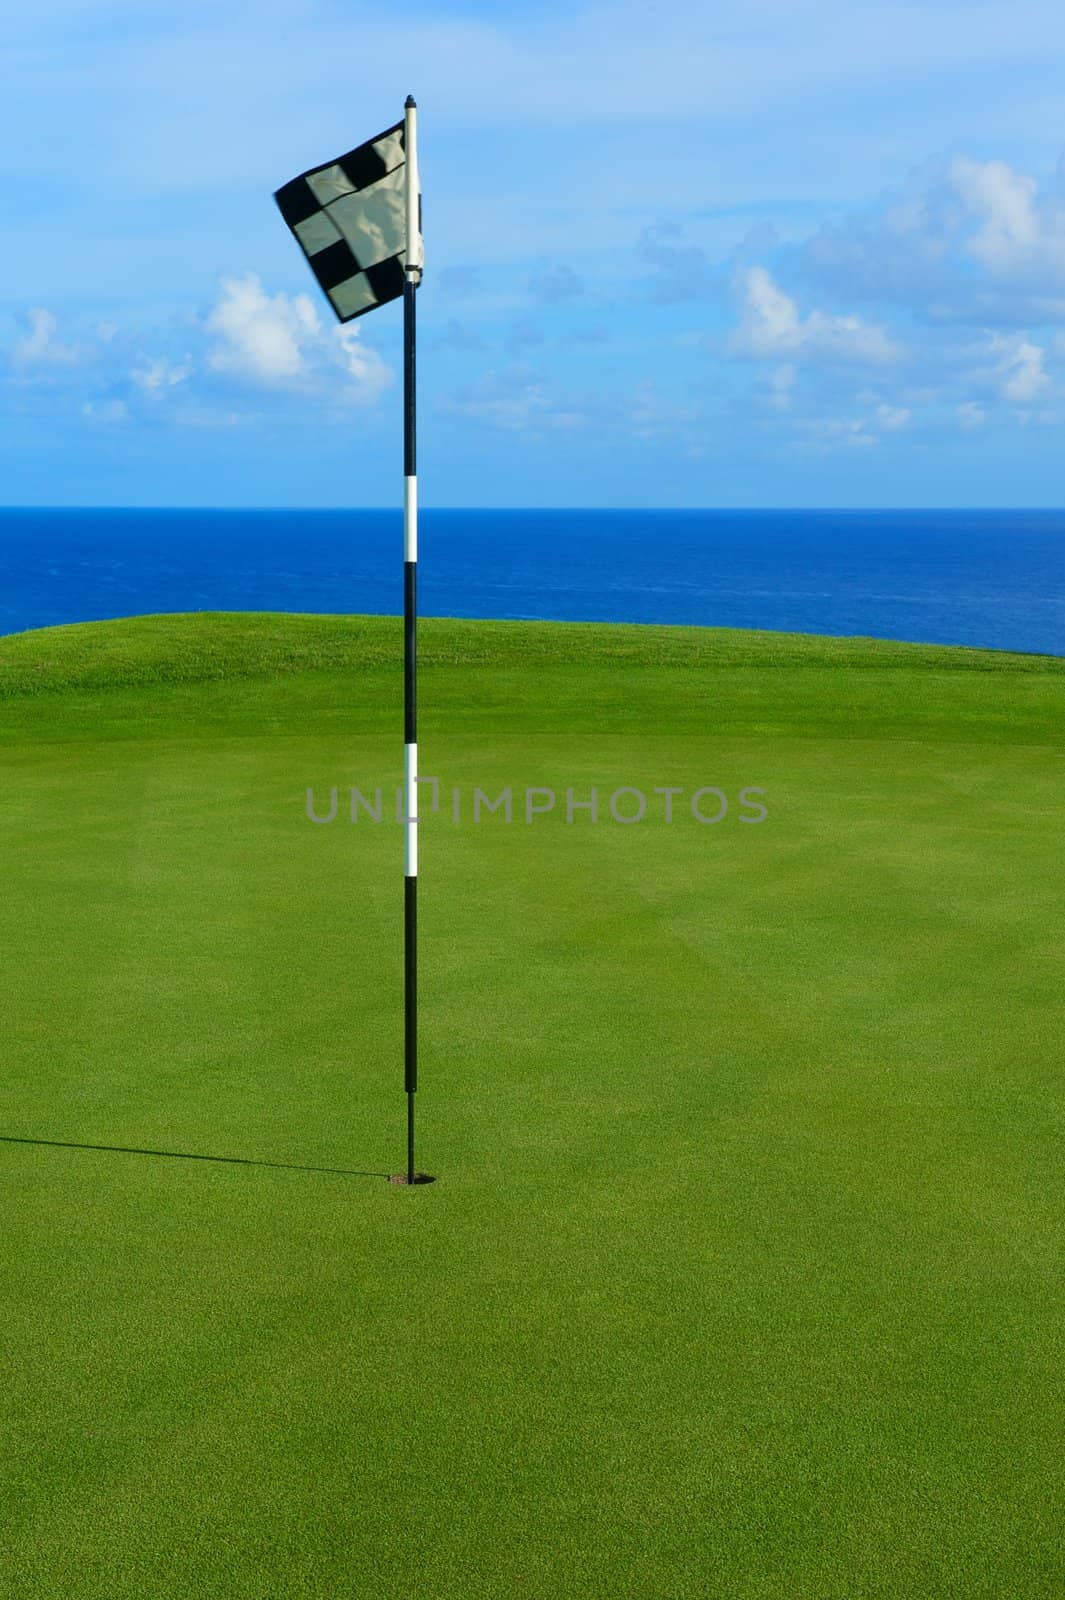 This is a flag and pin on the tee of a golf course in Hawaii overlooking the Pacific Ocean